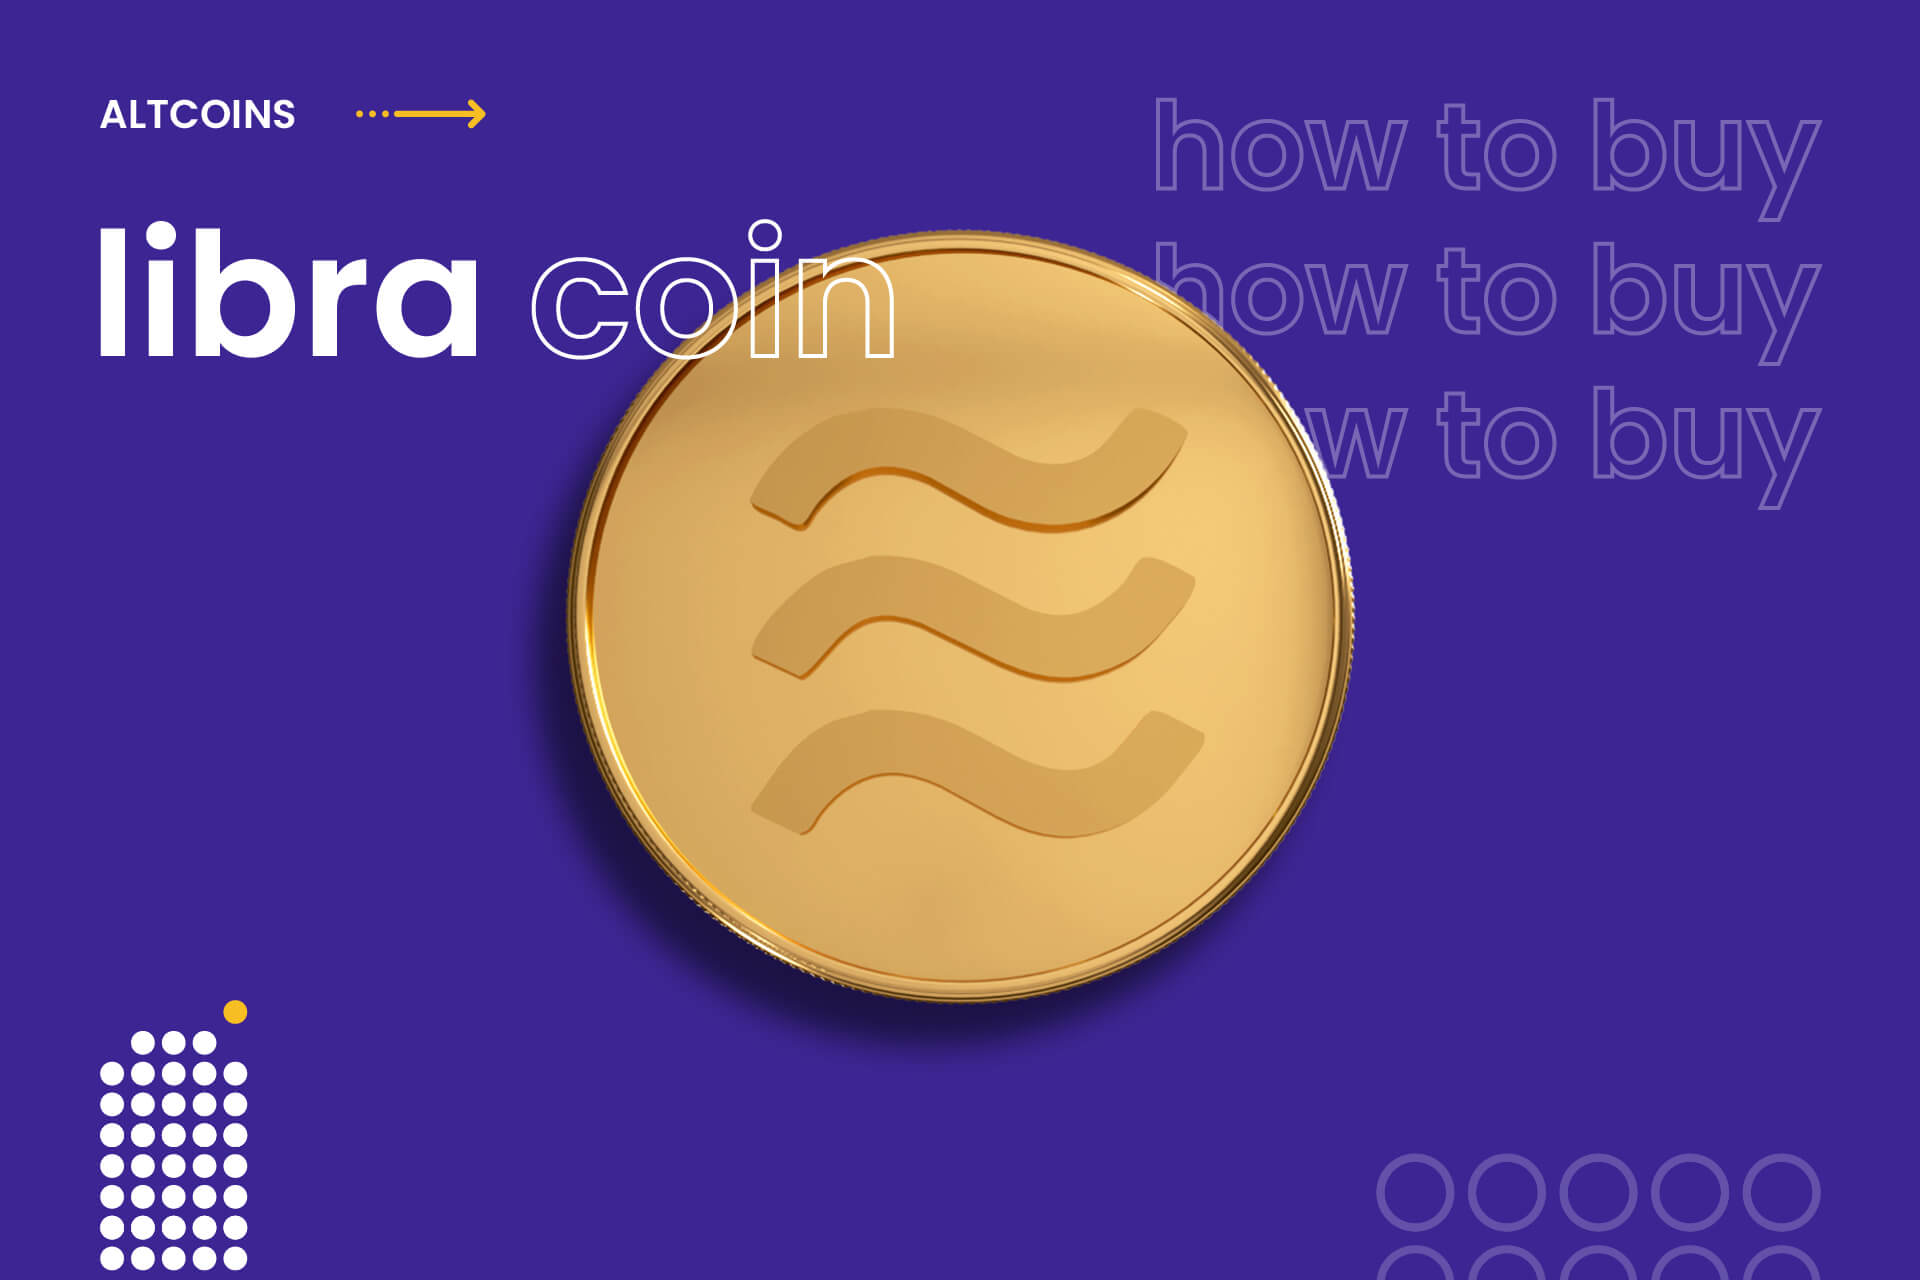 Is Libra e-money or a virtual currency? | PayTechLaw